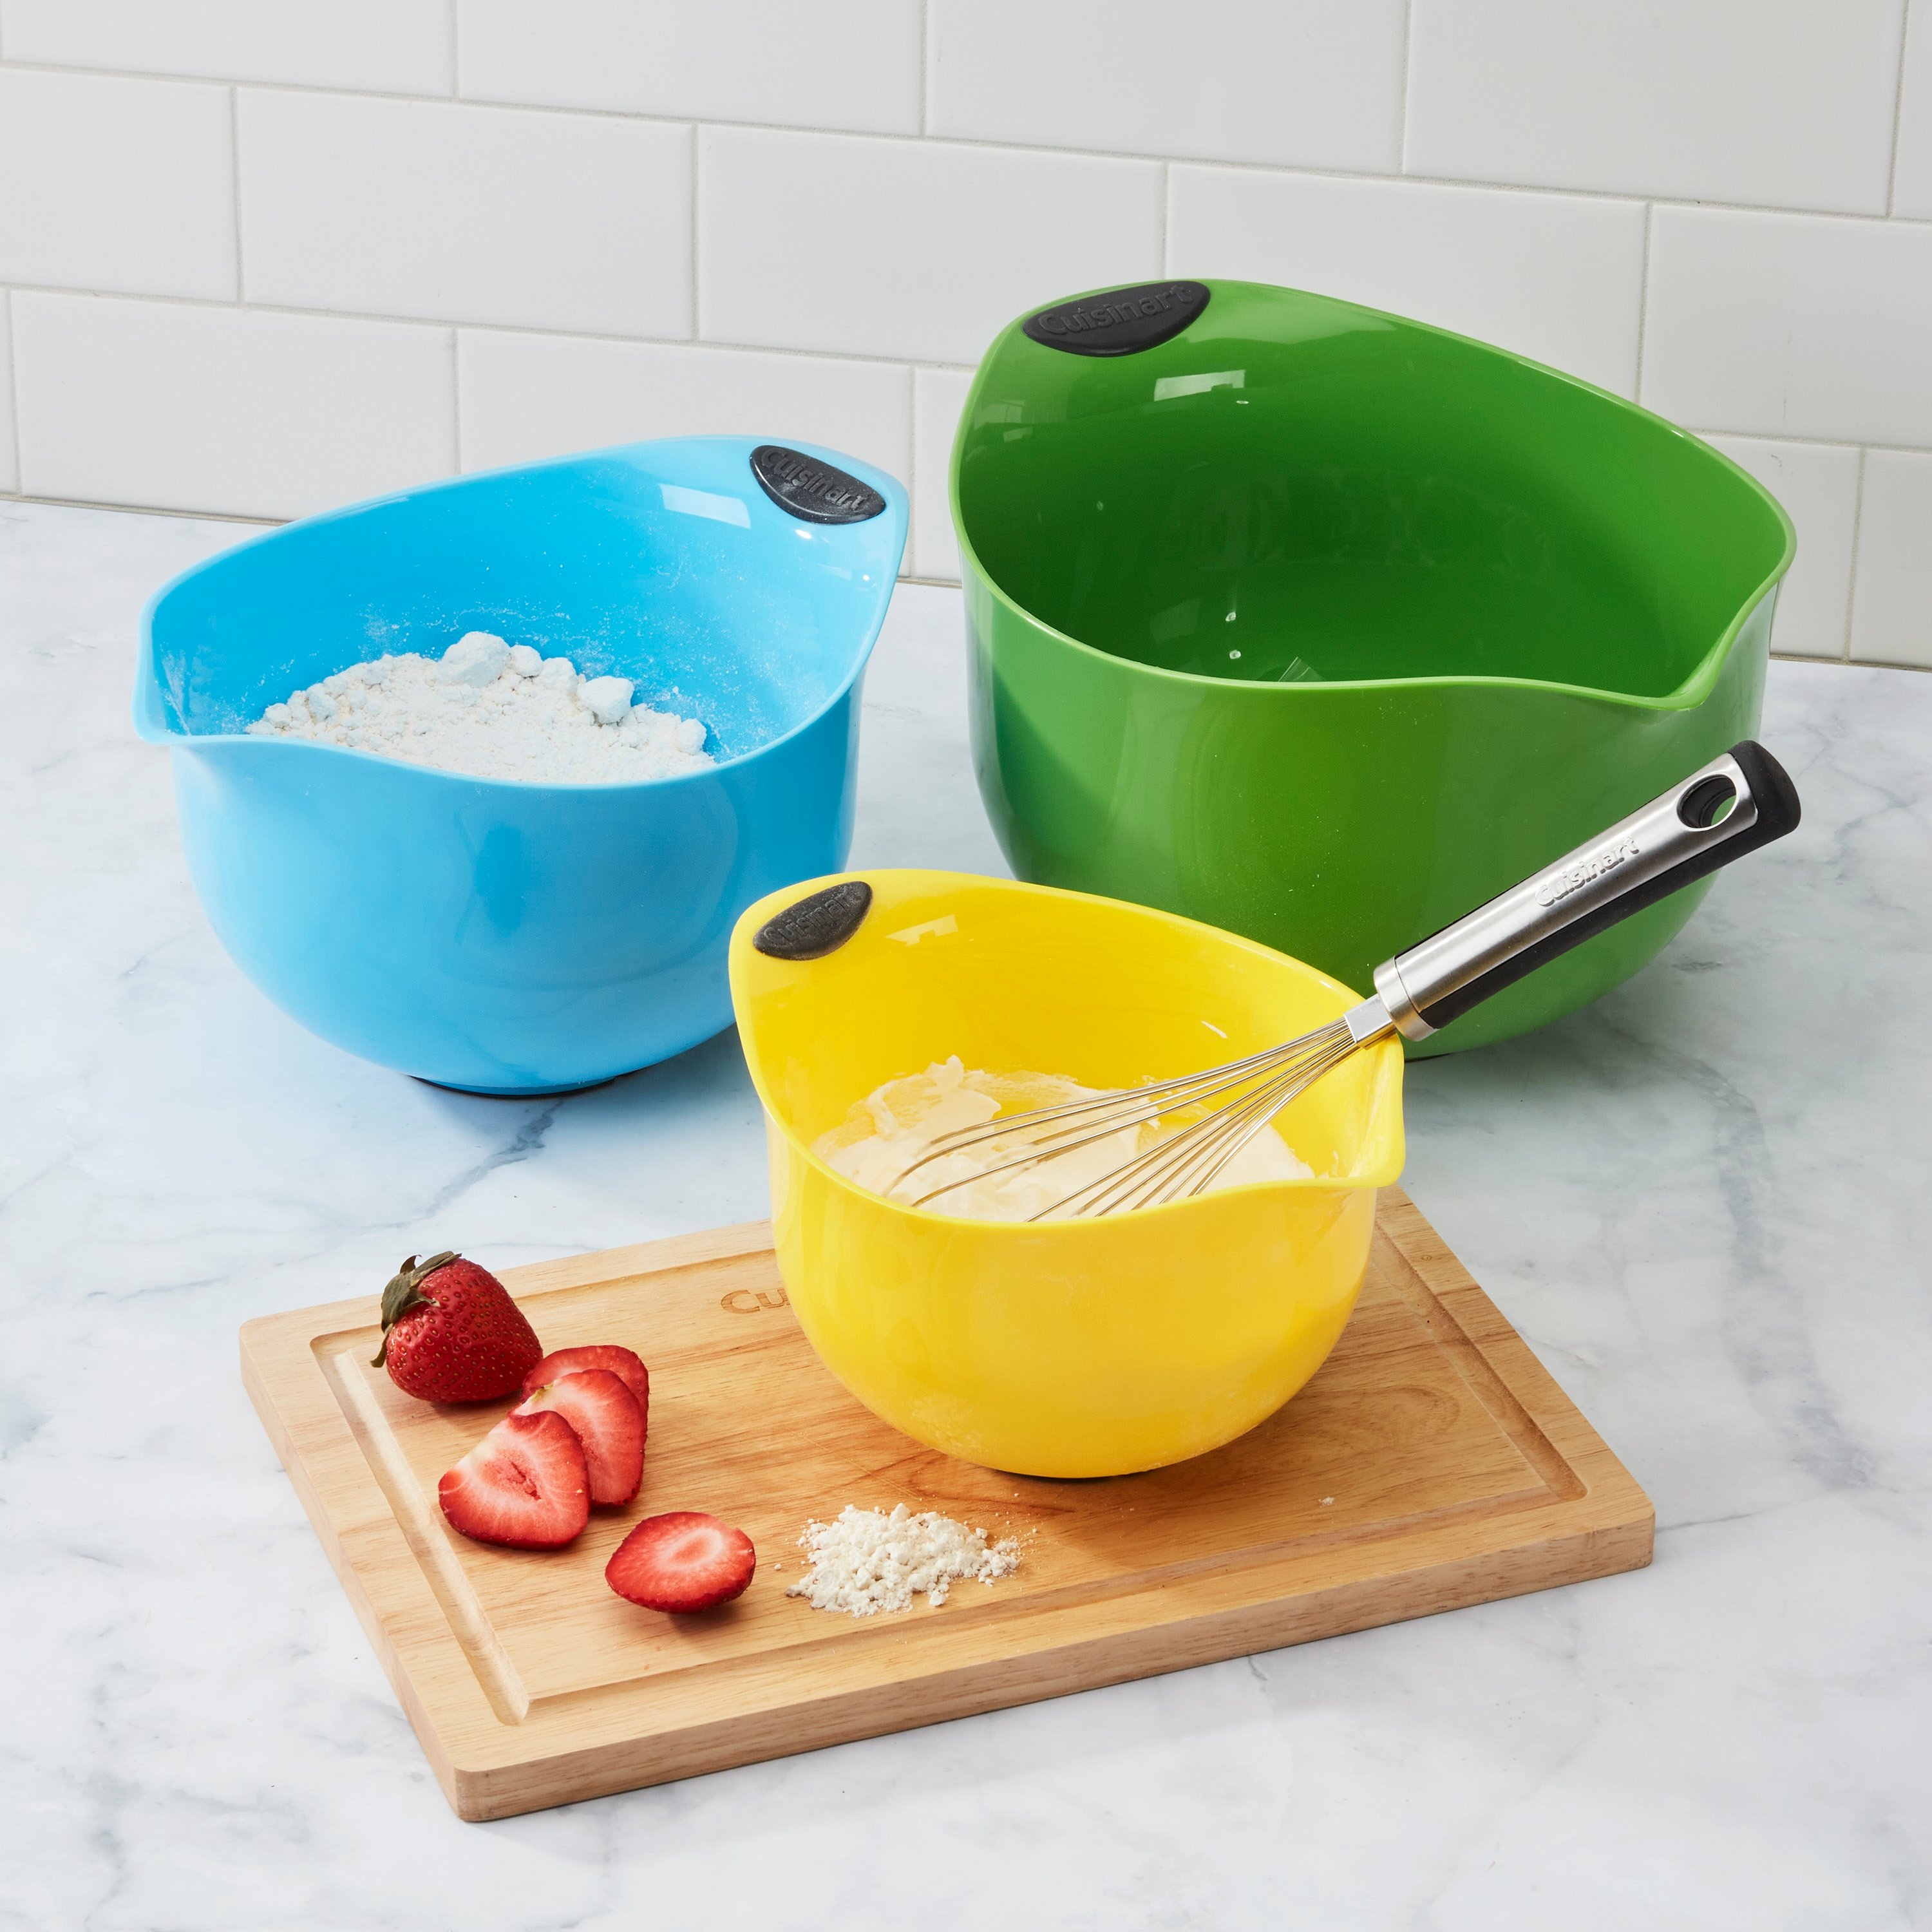 The Best Mixing Bowls, According to a Former Bakery Owner